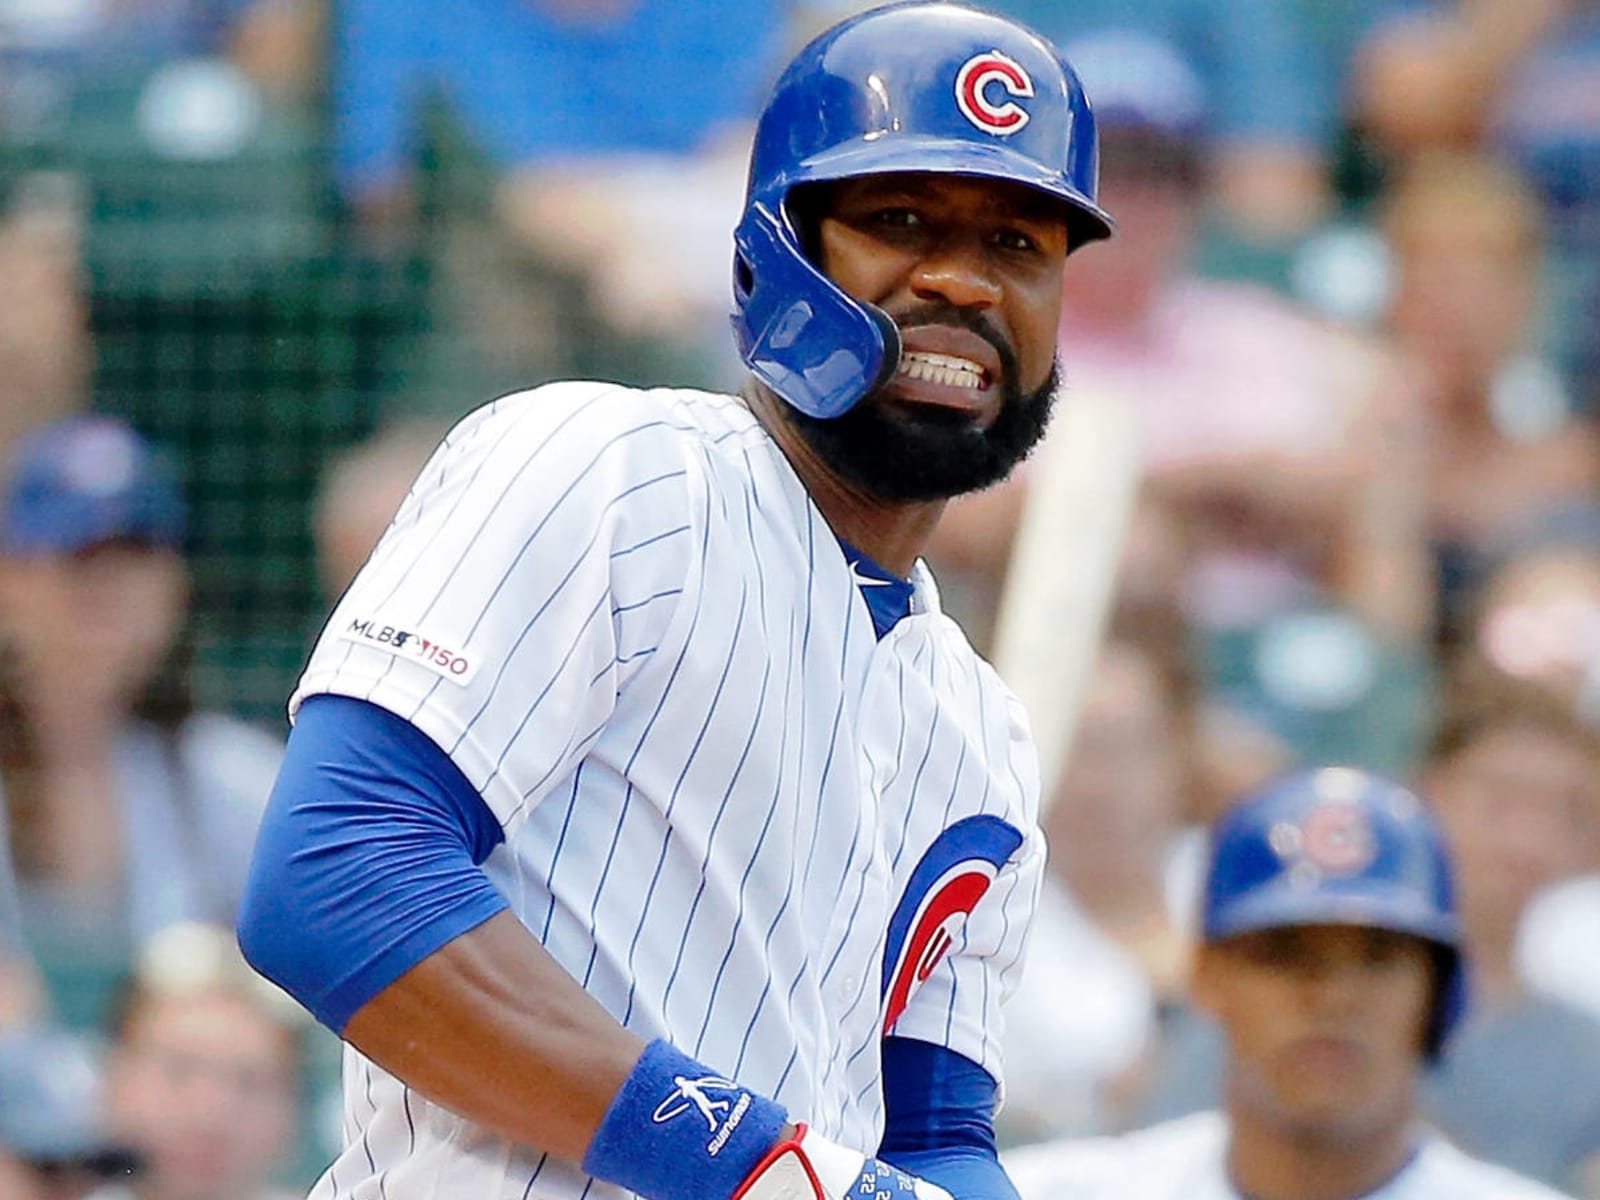 Butterfly effects: A look back at the Cubs' Jason Heyward signing